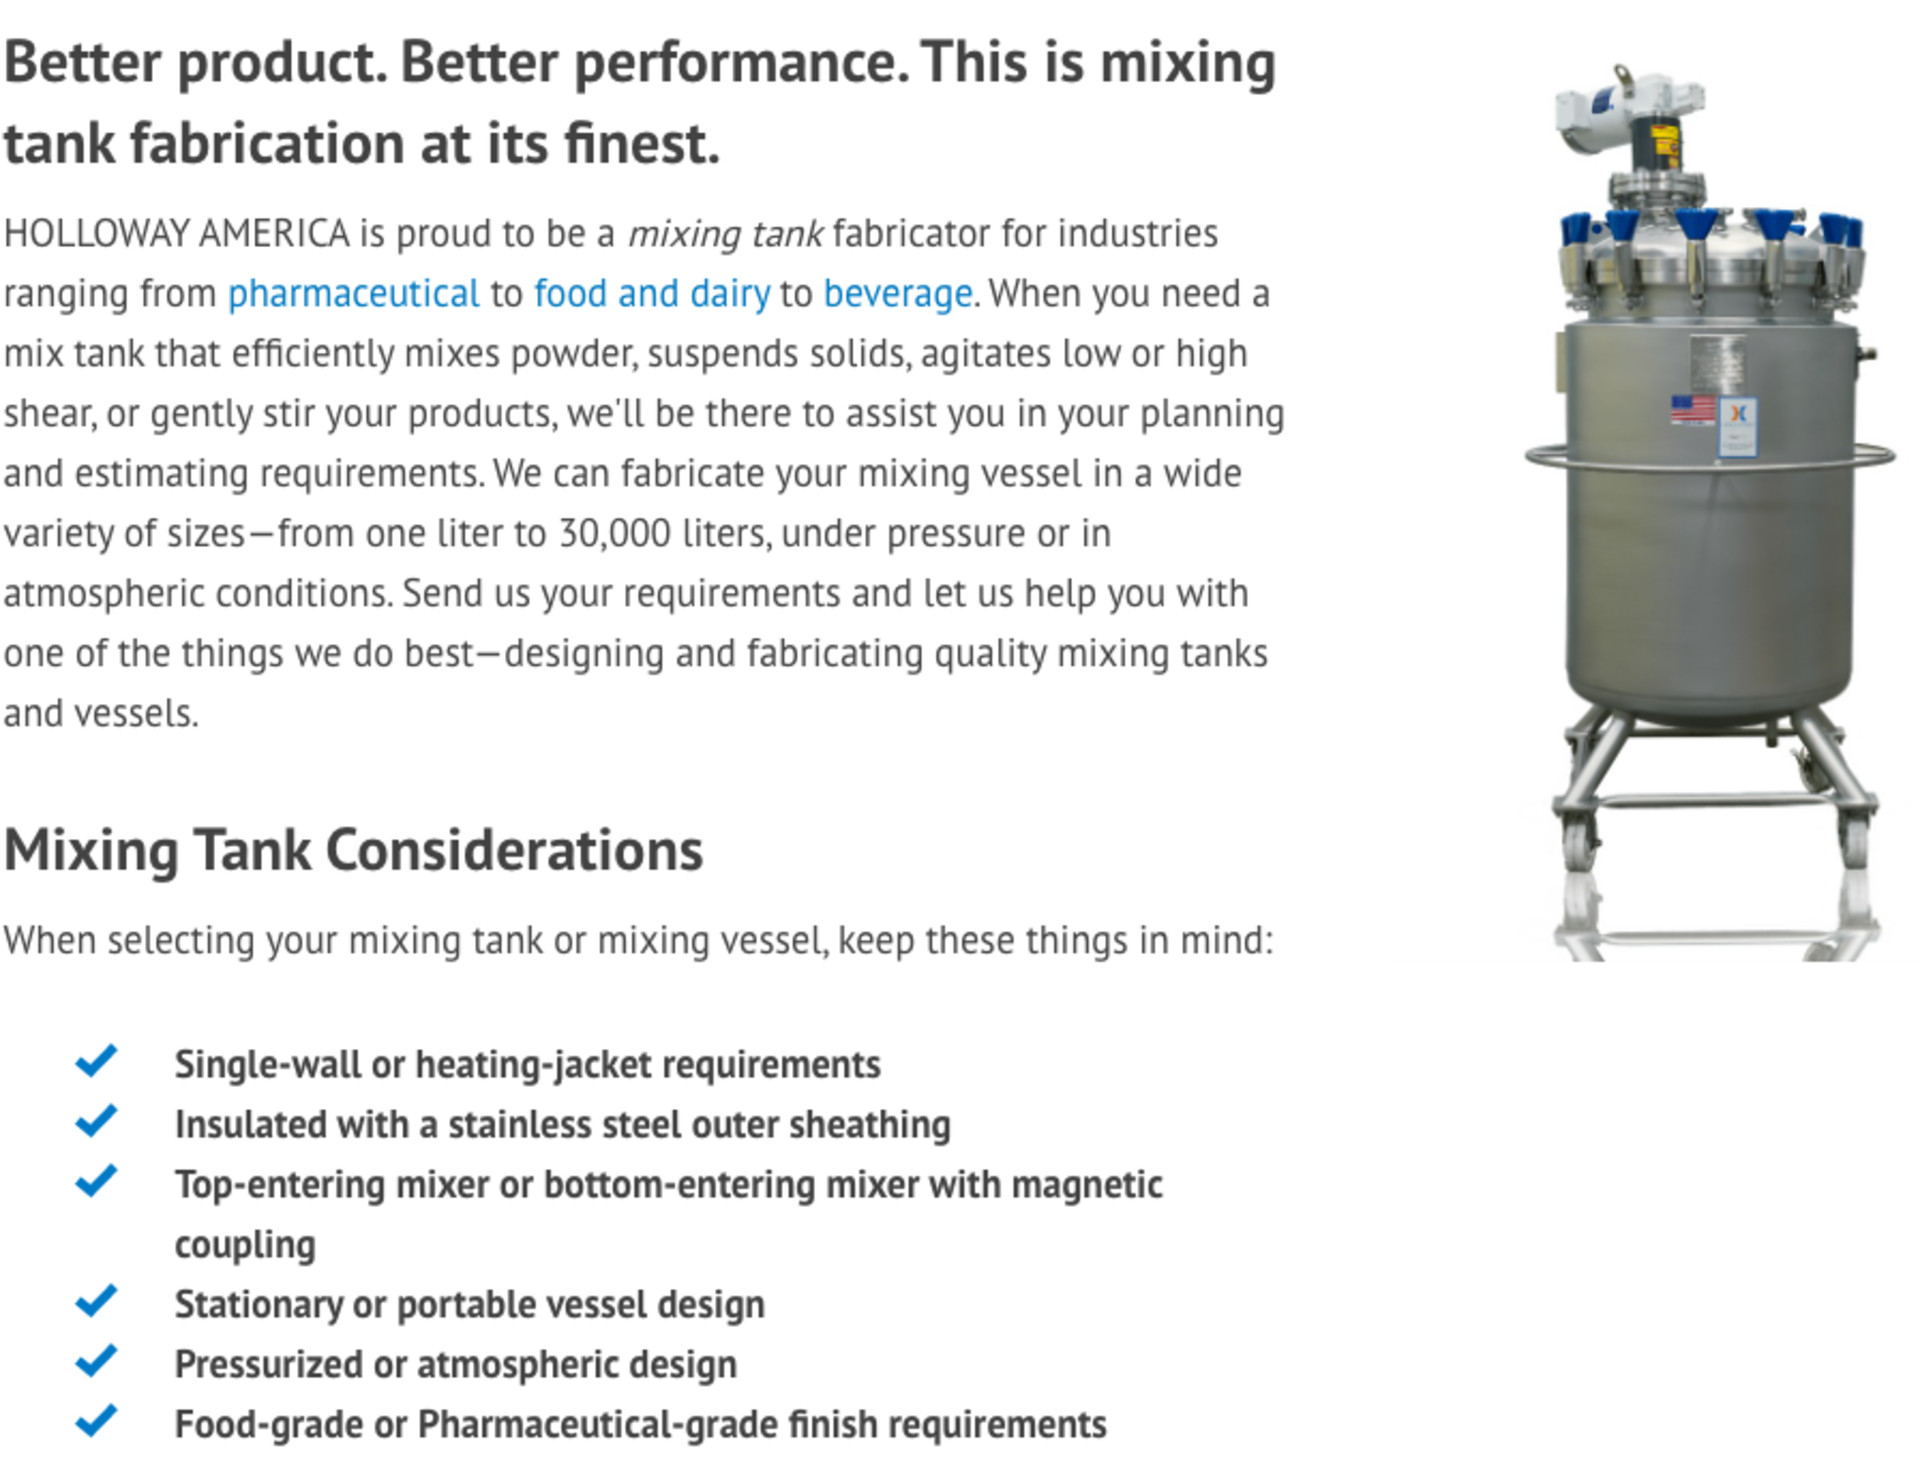 Holloway America Precision 450 L Stainless Steel Mixing Tank on Casters - Image 10 of 10